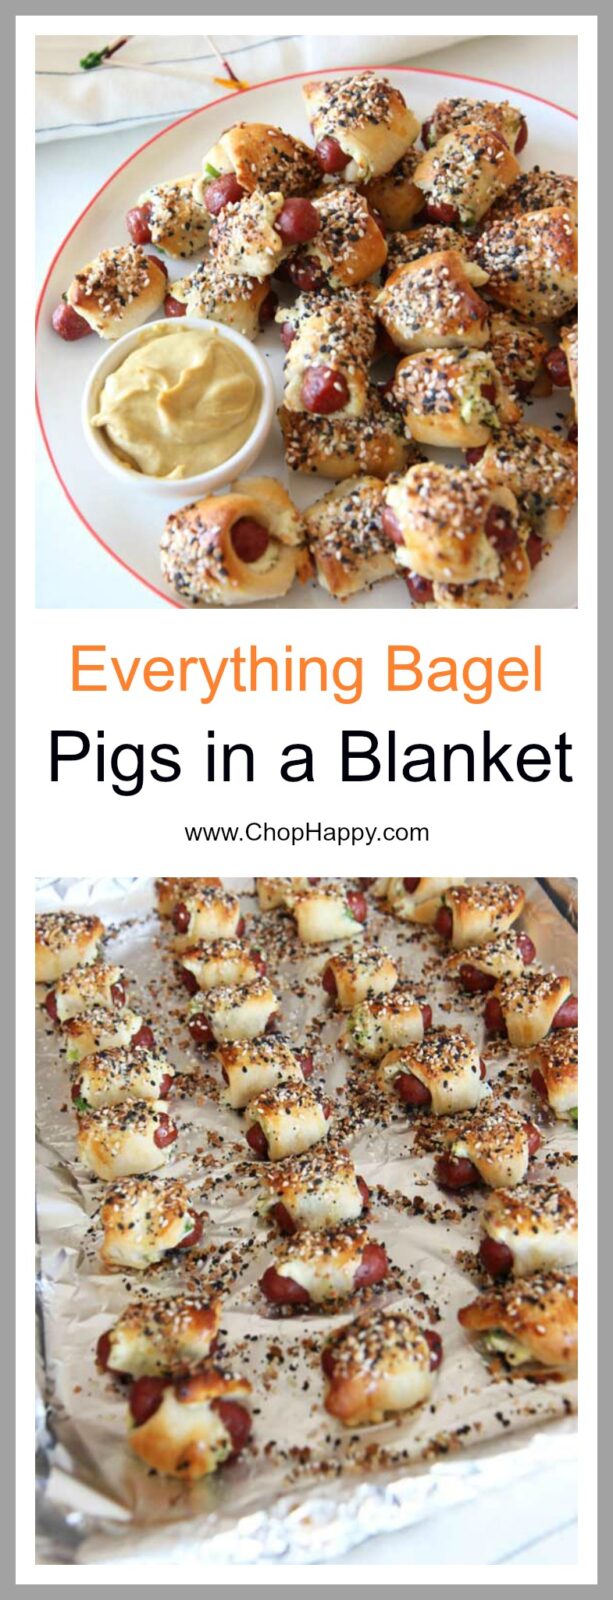 Everything Bagel Pigs in a Blanket Recipe - is crunchy, cheesy, garlicky and salty flavor yum appetizers. Grab crescent dough, everything bagel seasoning, and hot dogs for a super easy recipe. www.ChopHappy.com